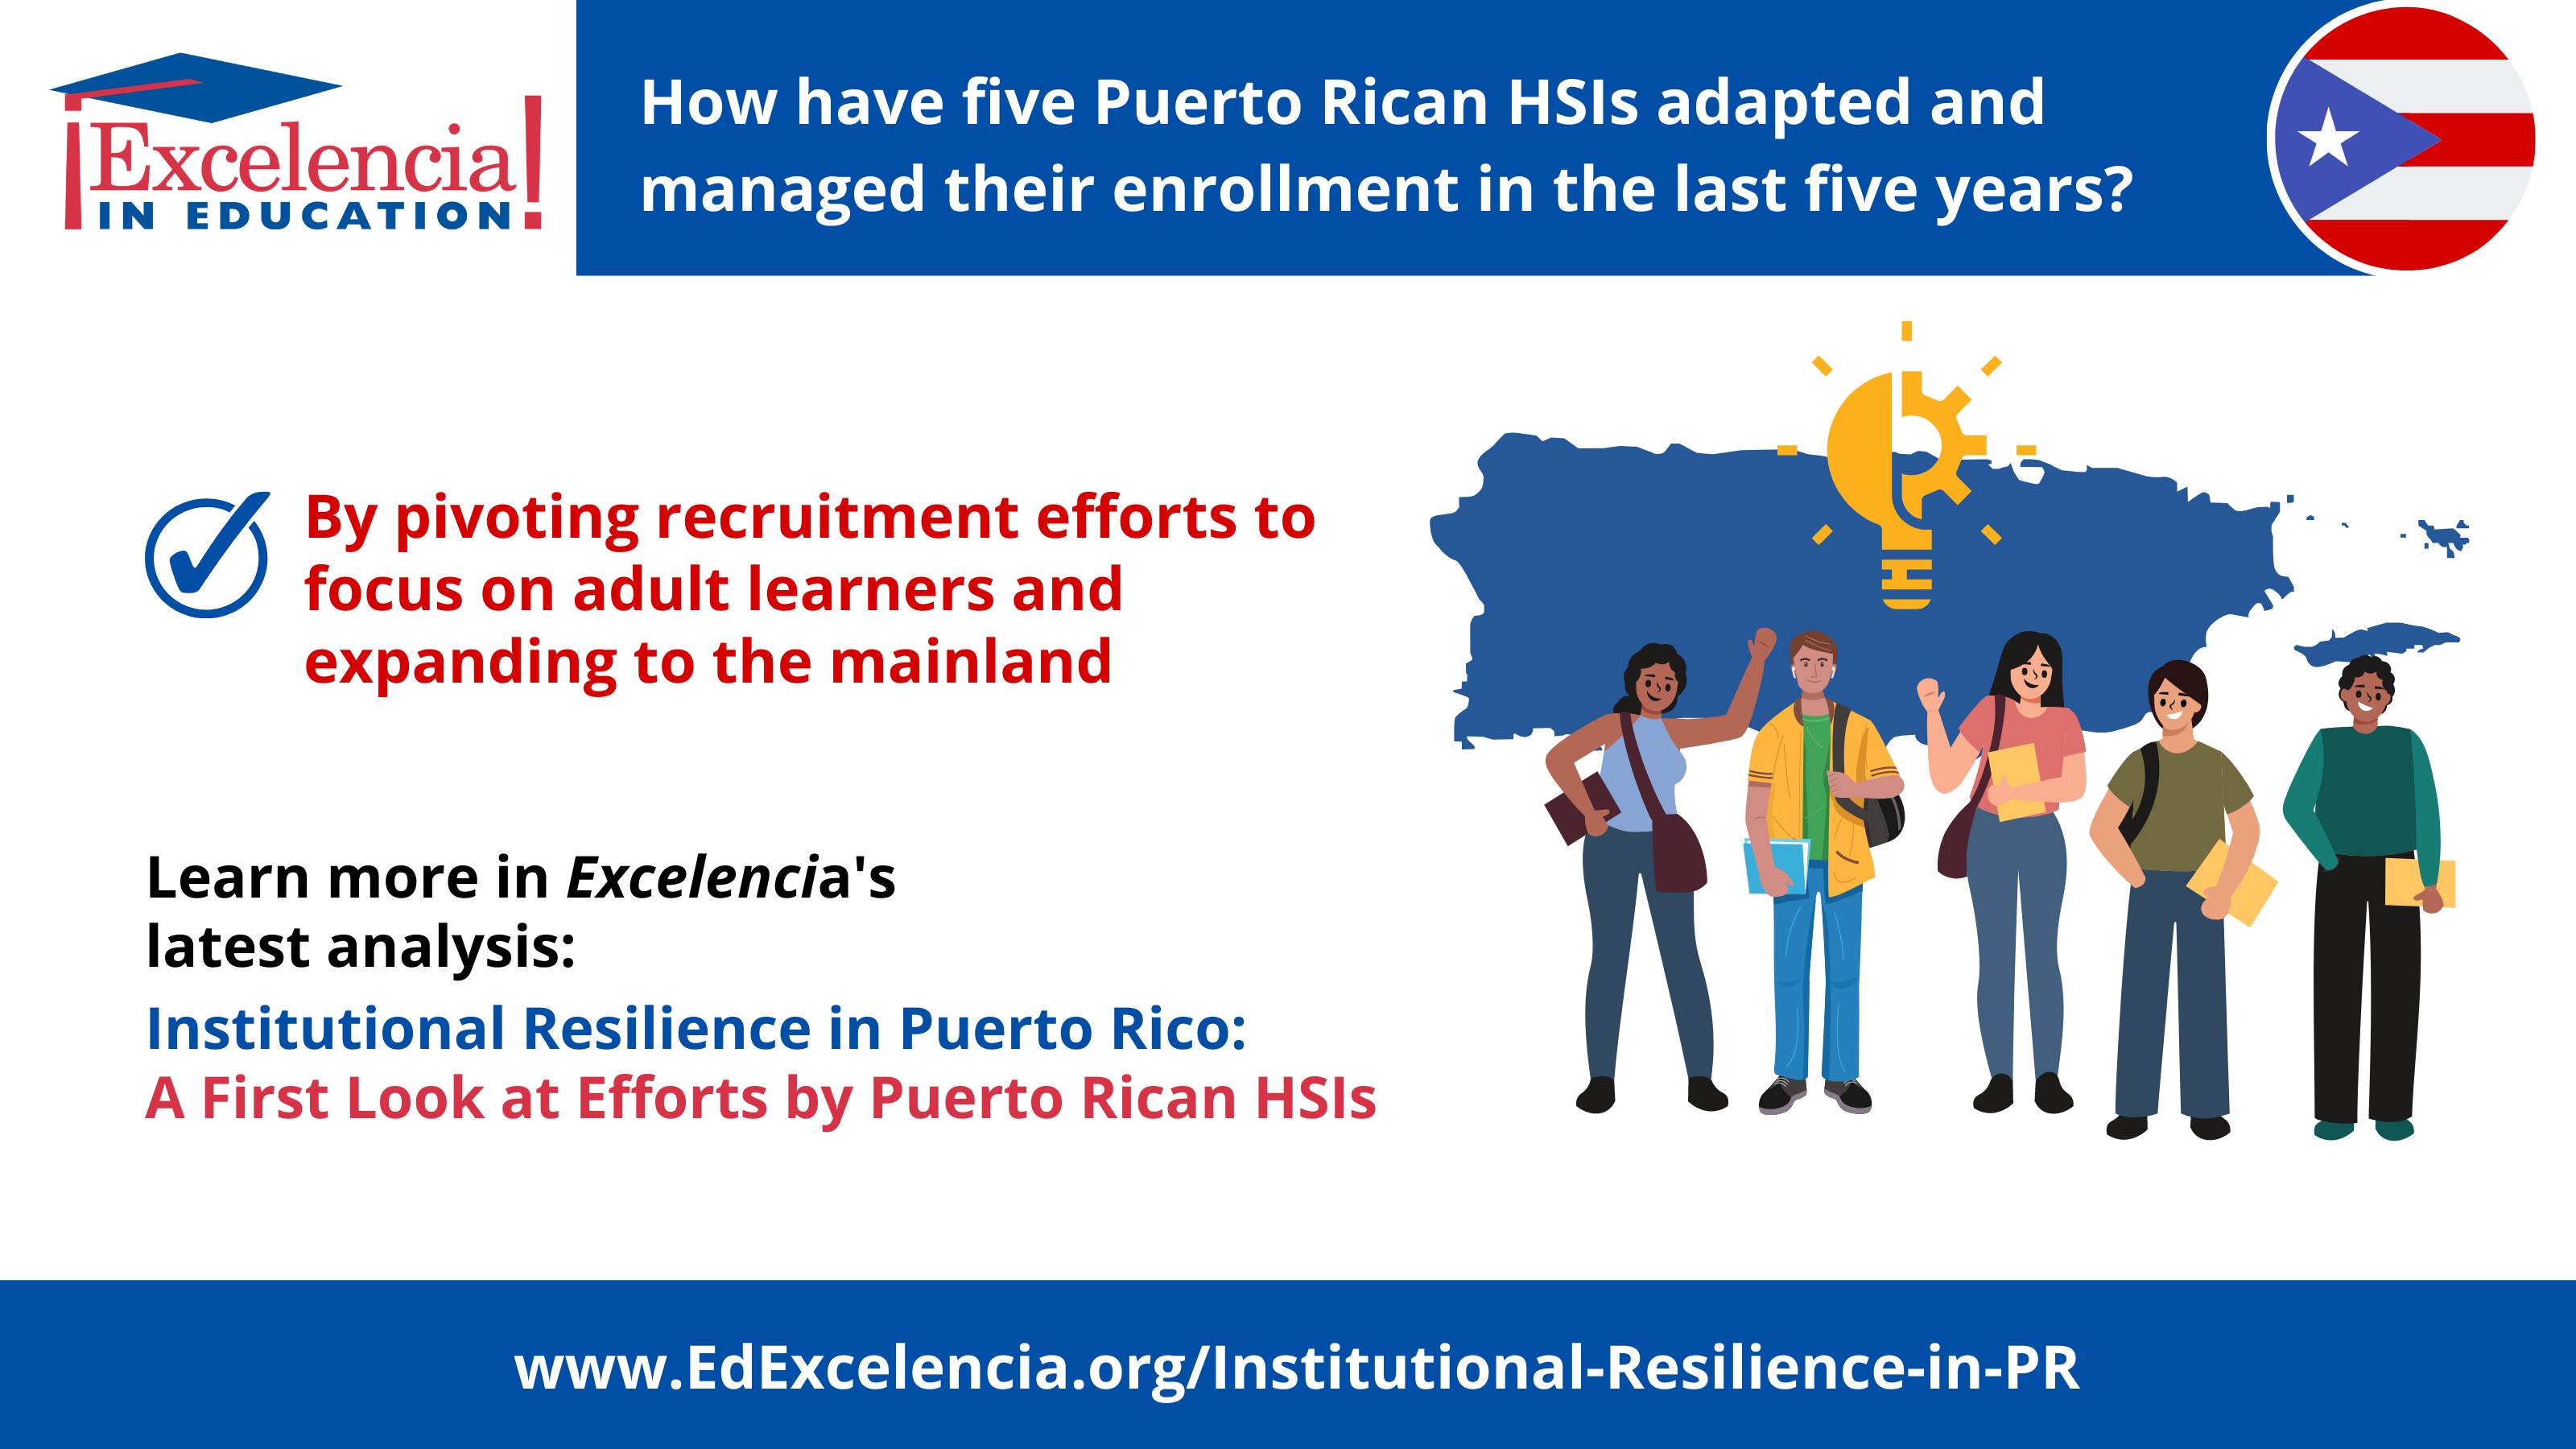 Infographic-How have five Puerto Rican HSIs adapted and managed their enrollment in the last five years?